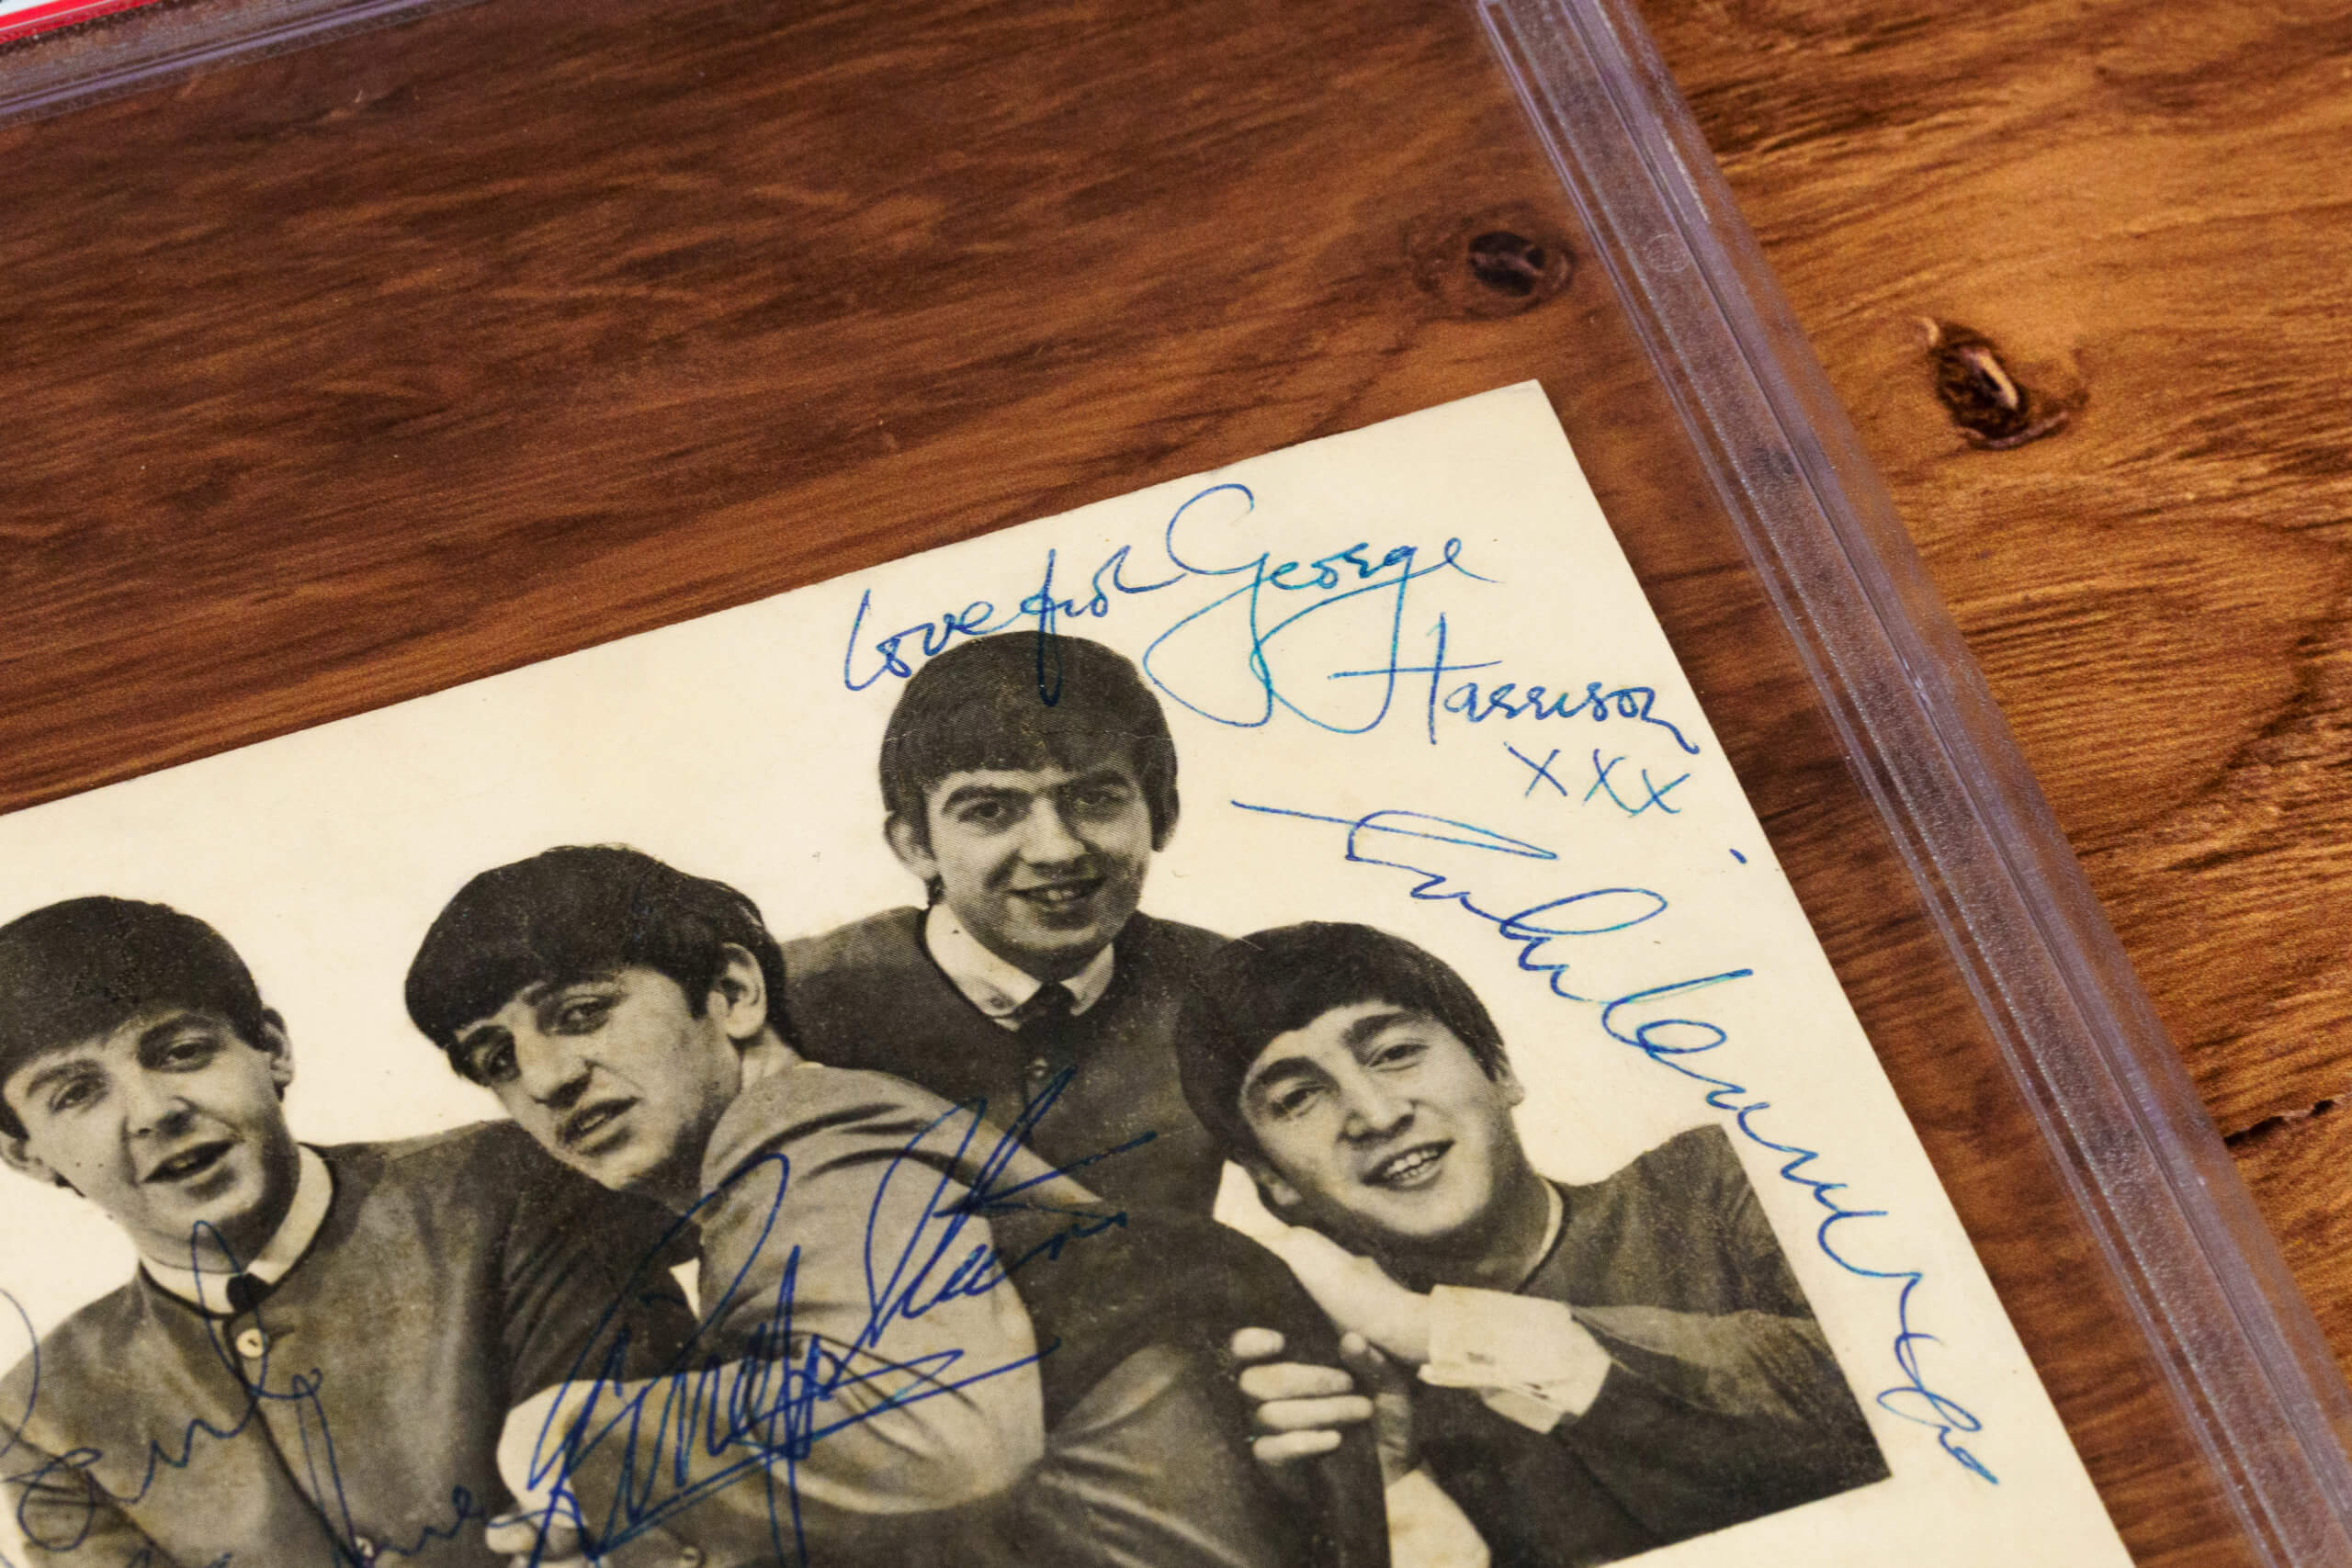 Signed card for the Beatles Fan Club with a black and white image of the band members